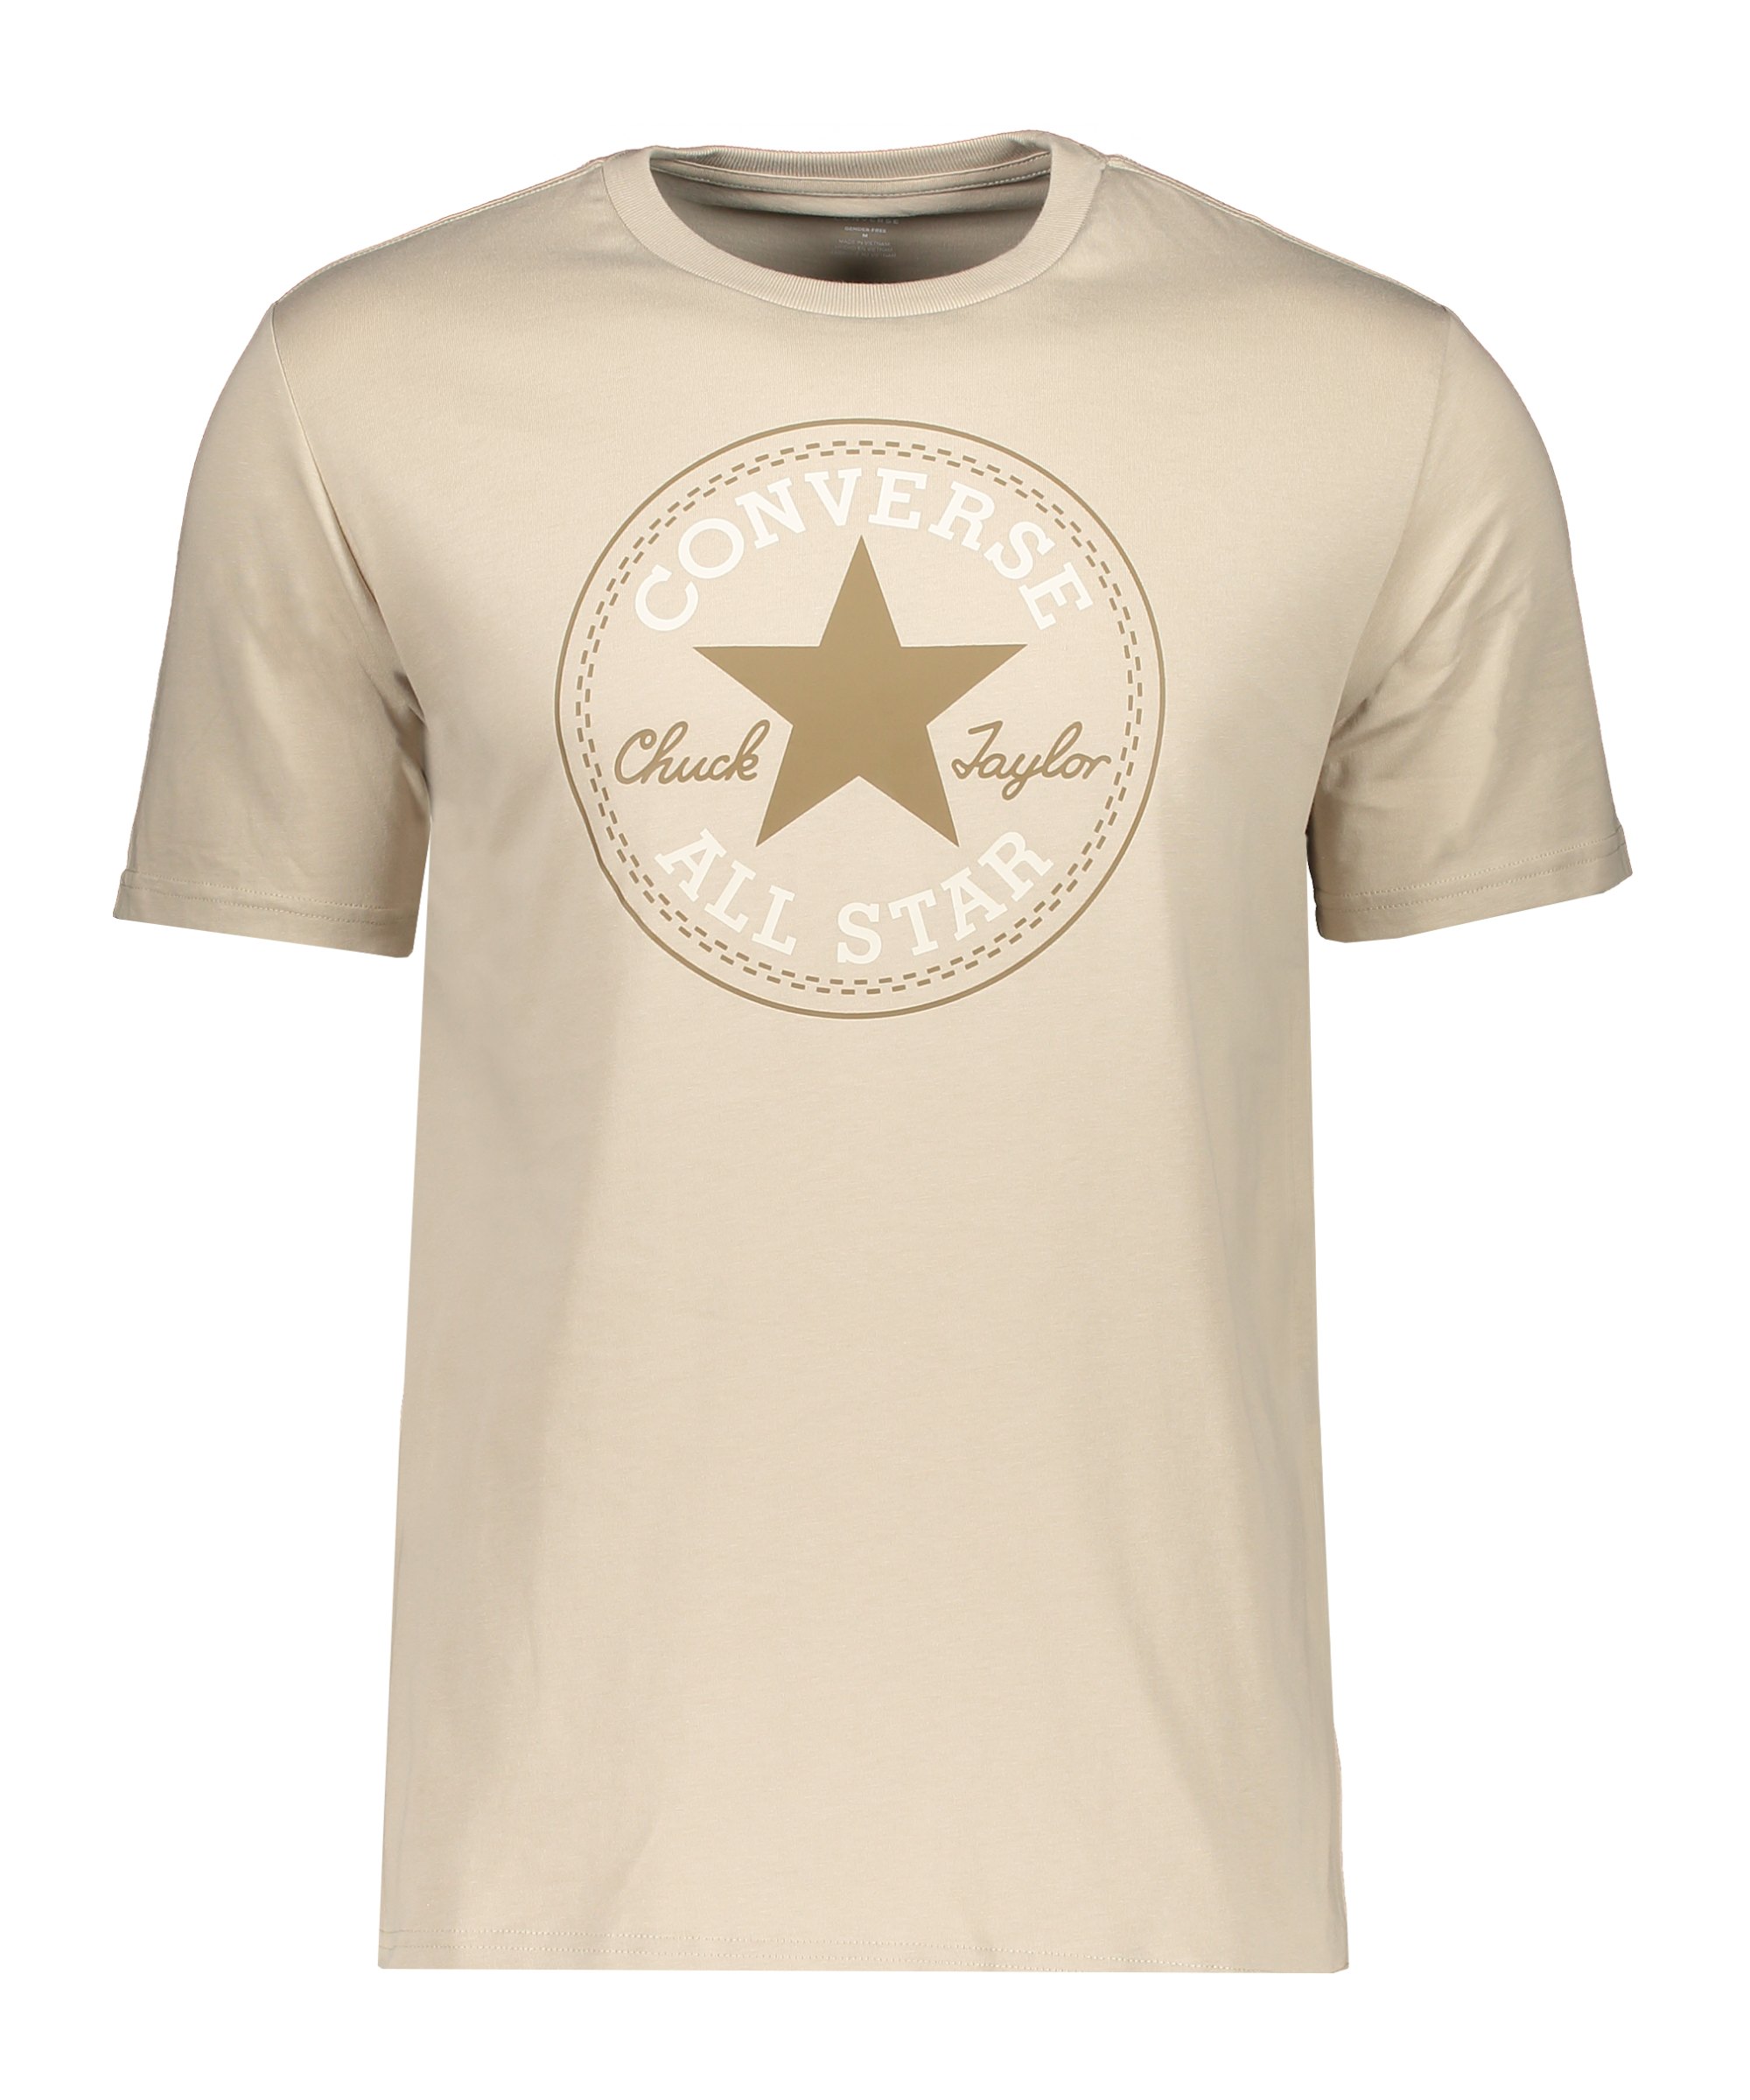 Converse Go-To All Star Fit T-Shirt Beige beige